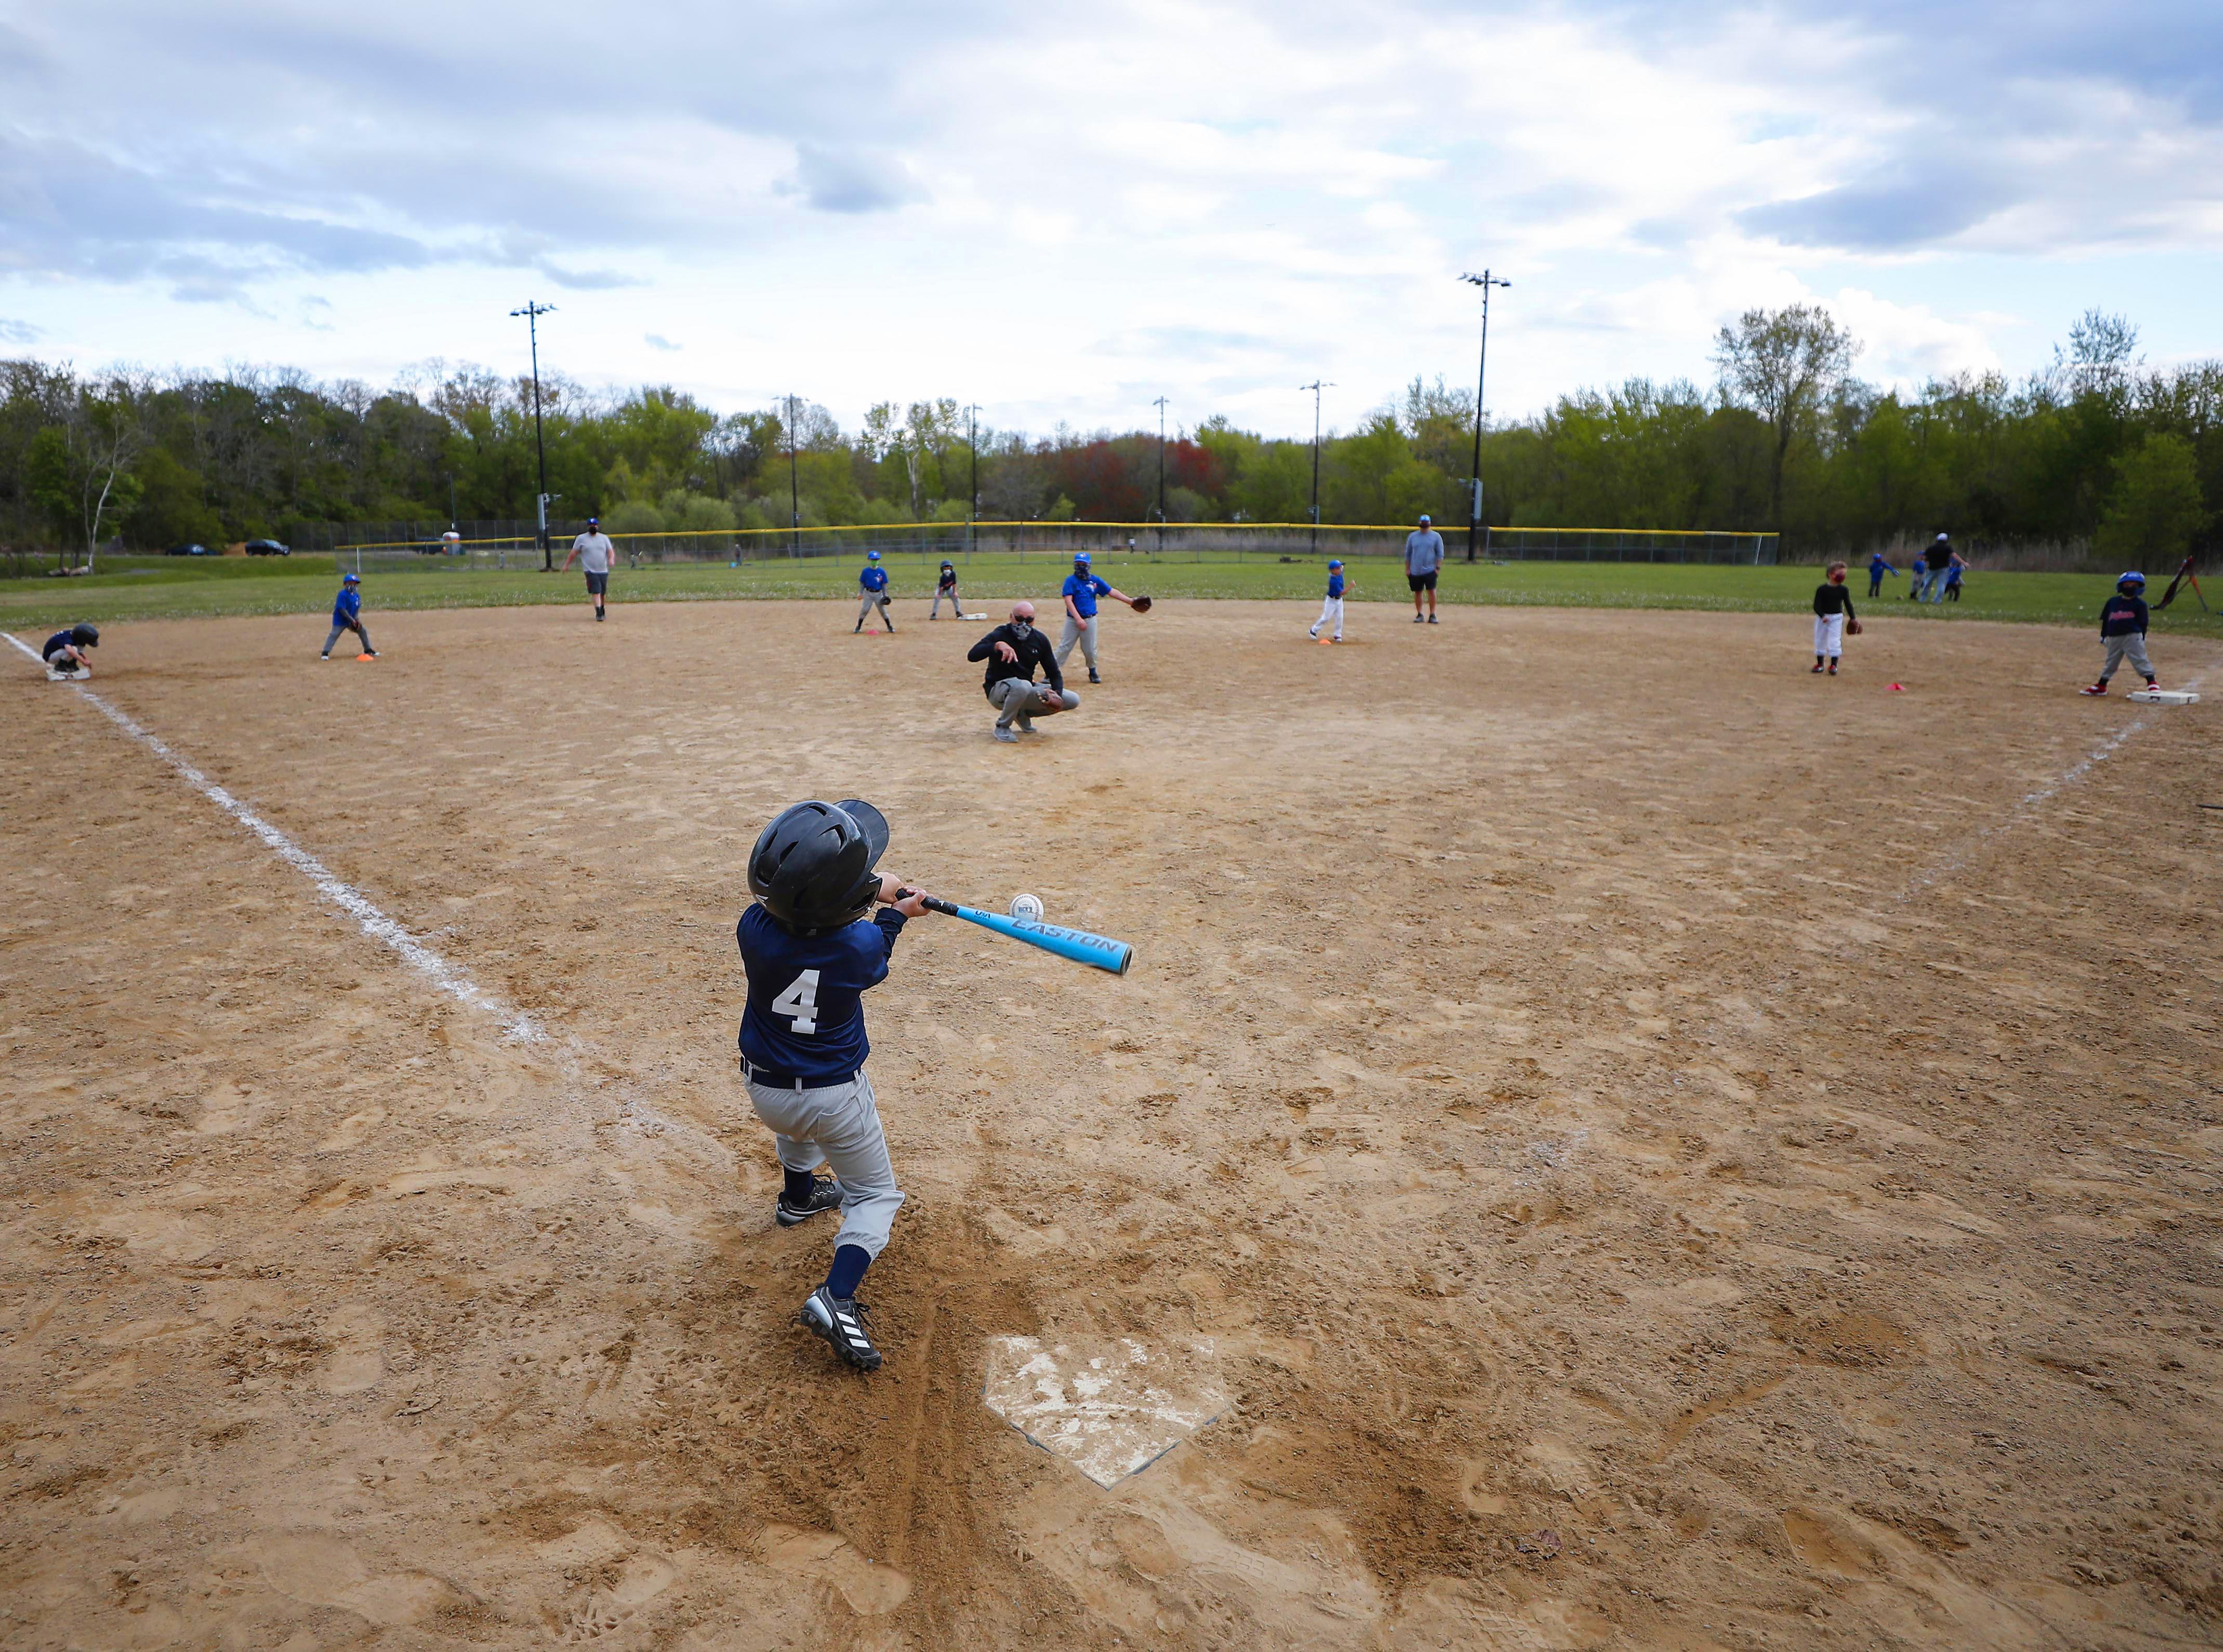 The return of youth baseball brings a sense of normalcy to kids